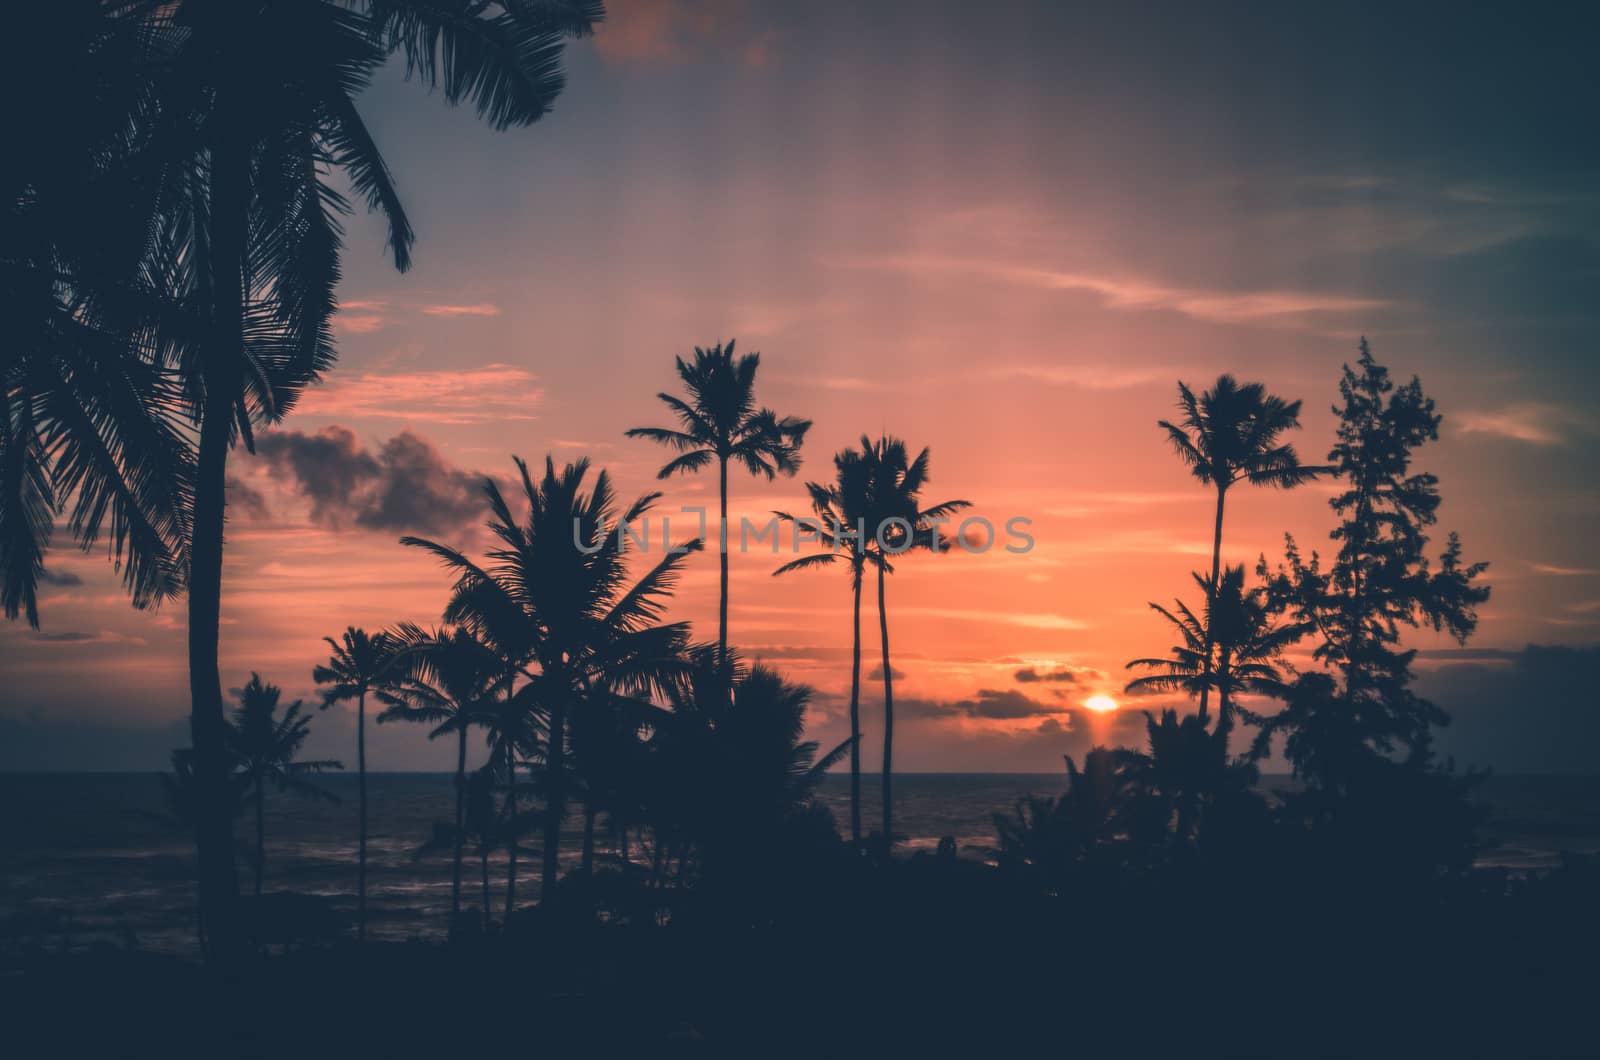 Hawaii, palm trees and sunsets a three commonly related terms. This picture present the trhee of them in a very harmonic way.